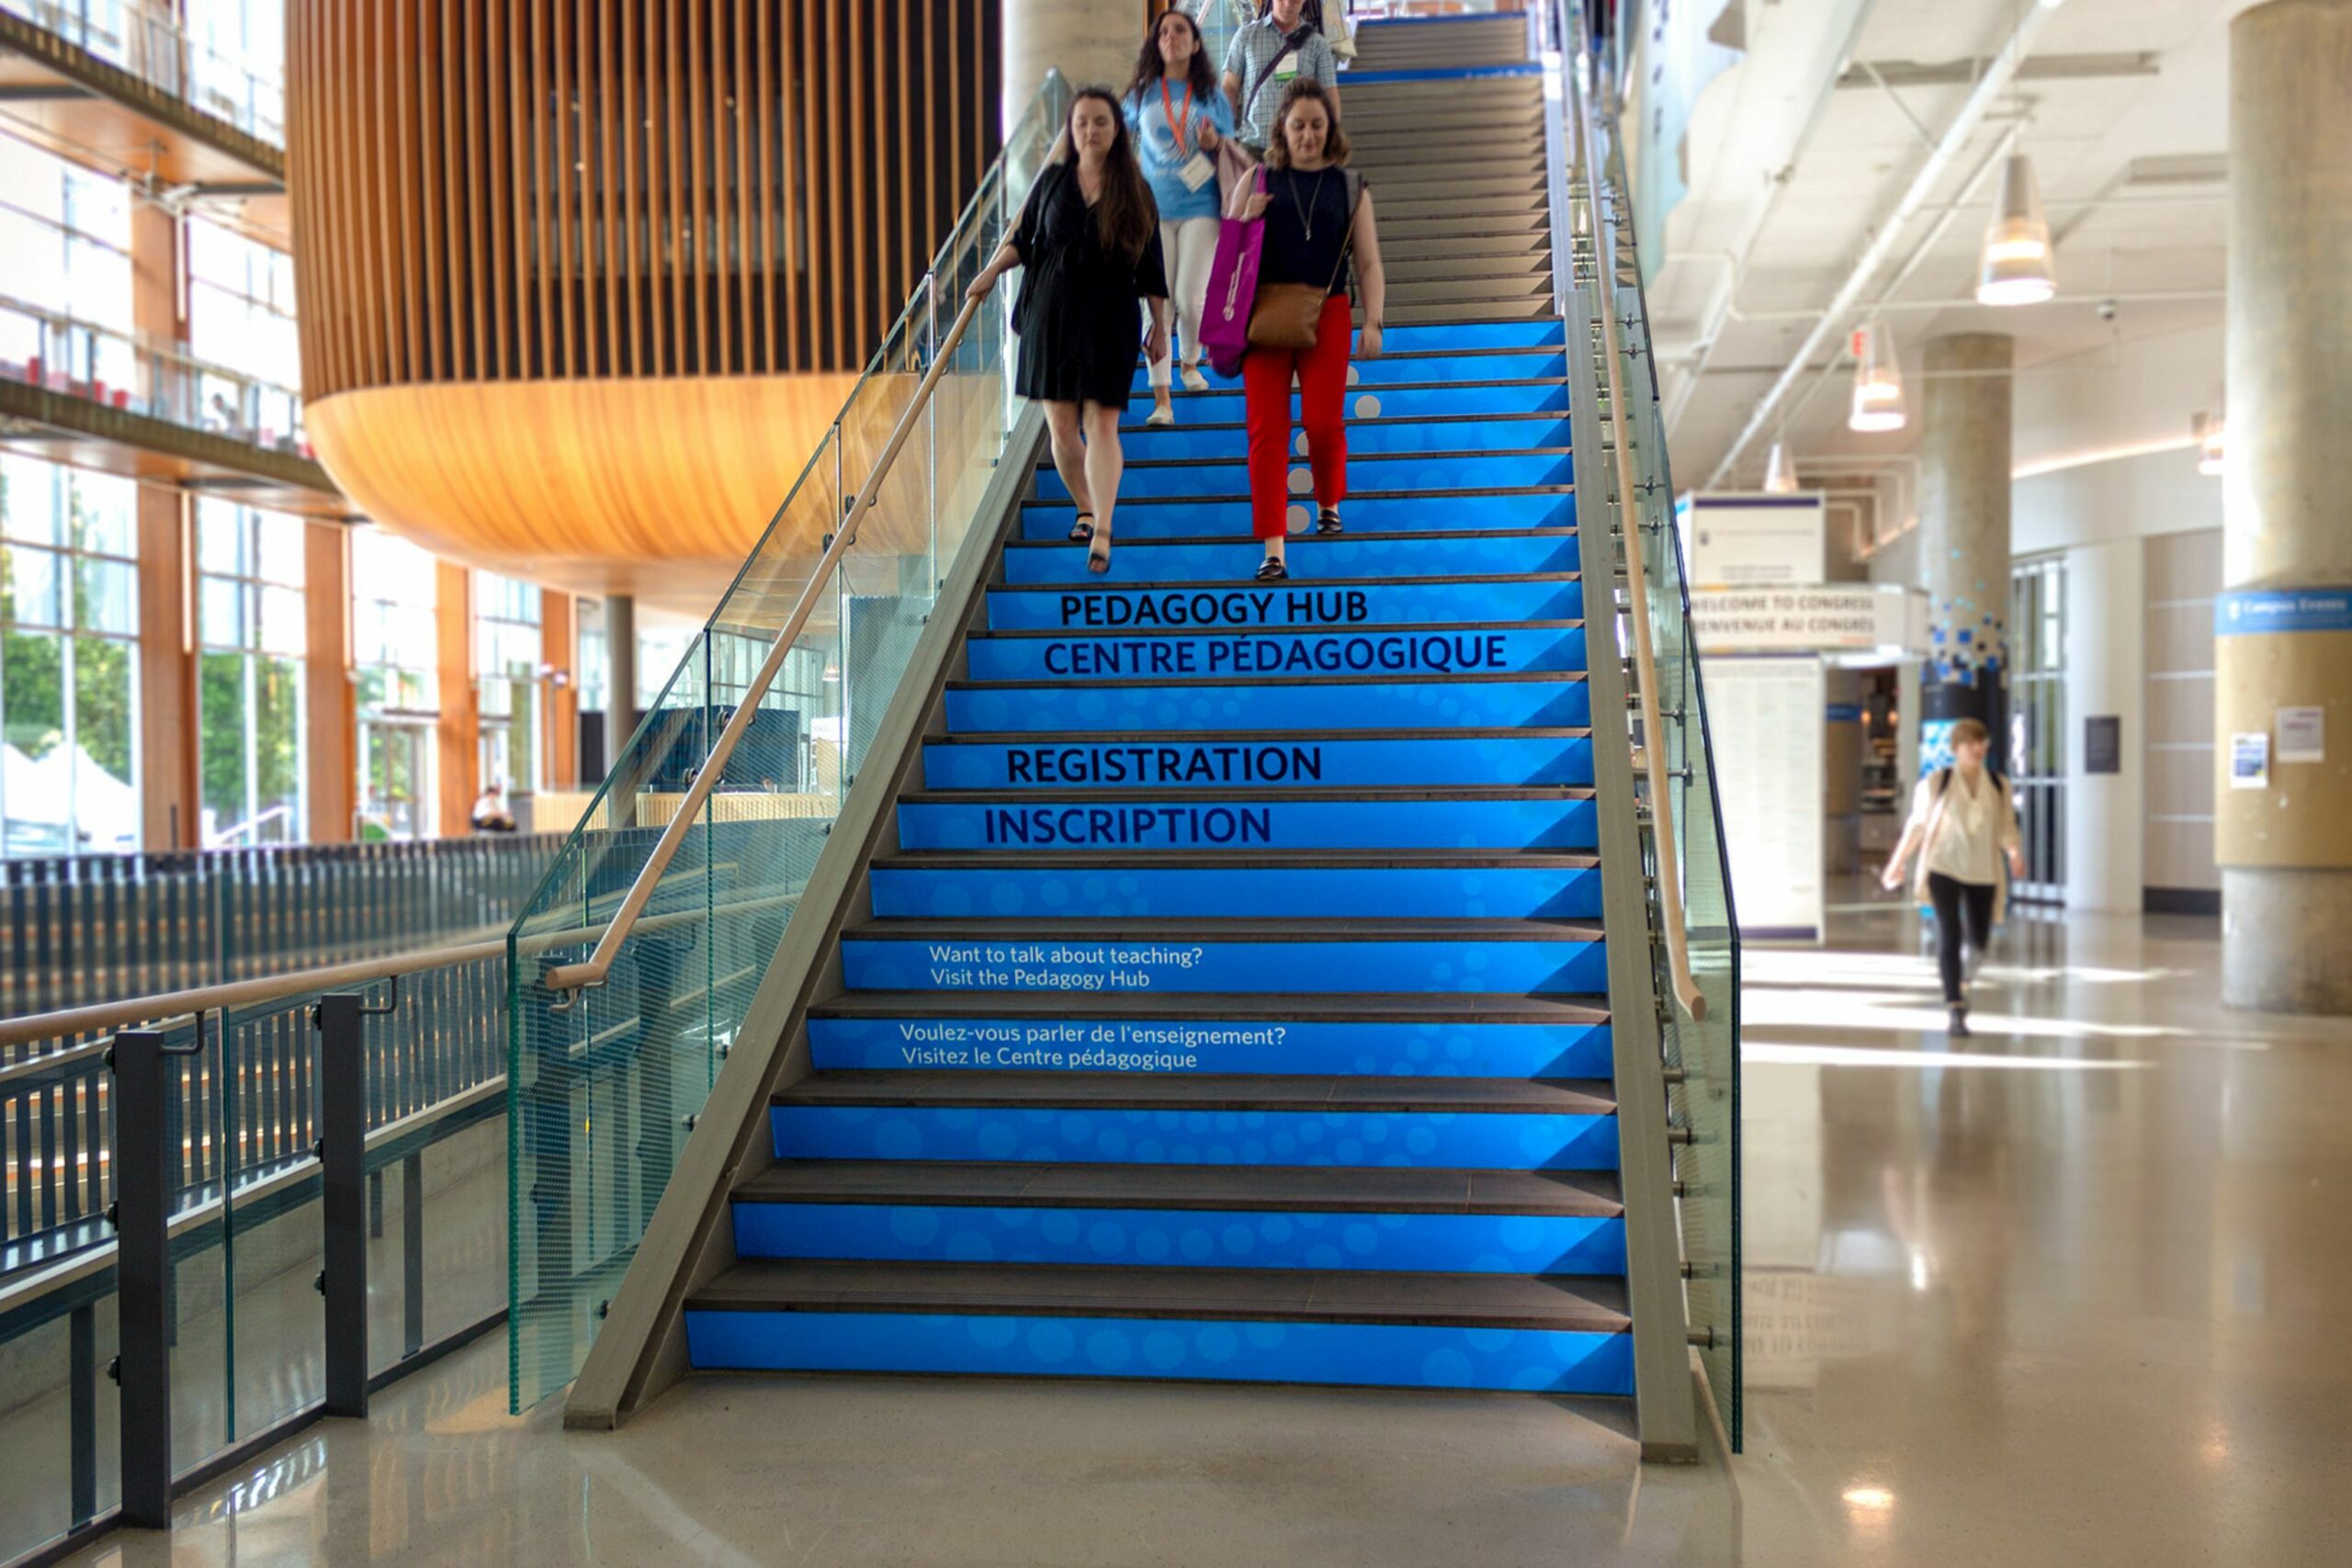 UBC Congress 2019 Branded Stairs